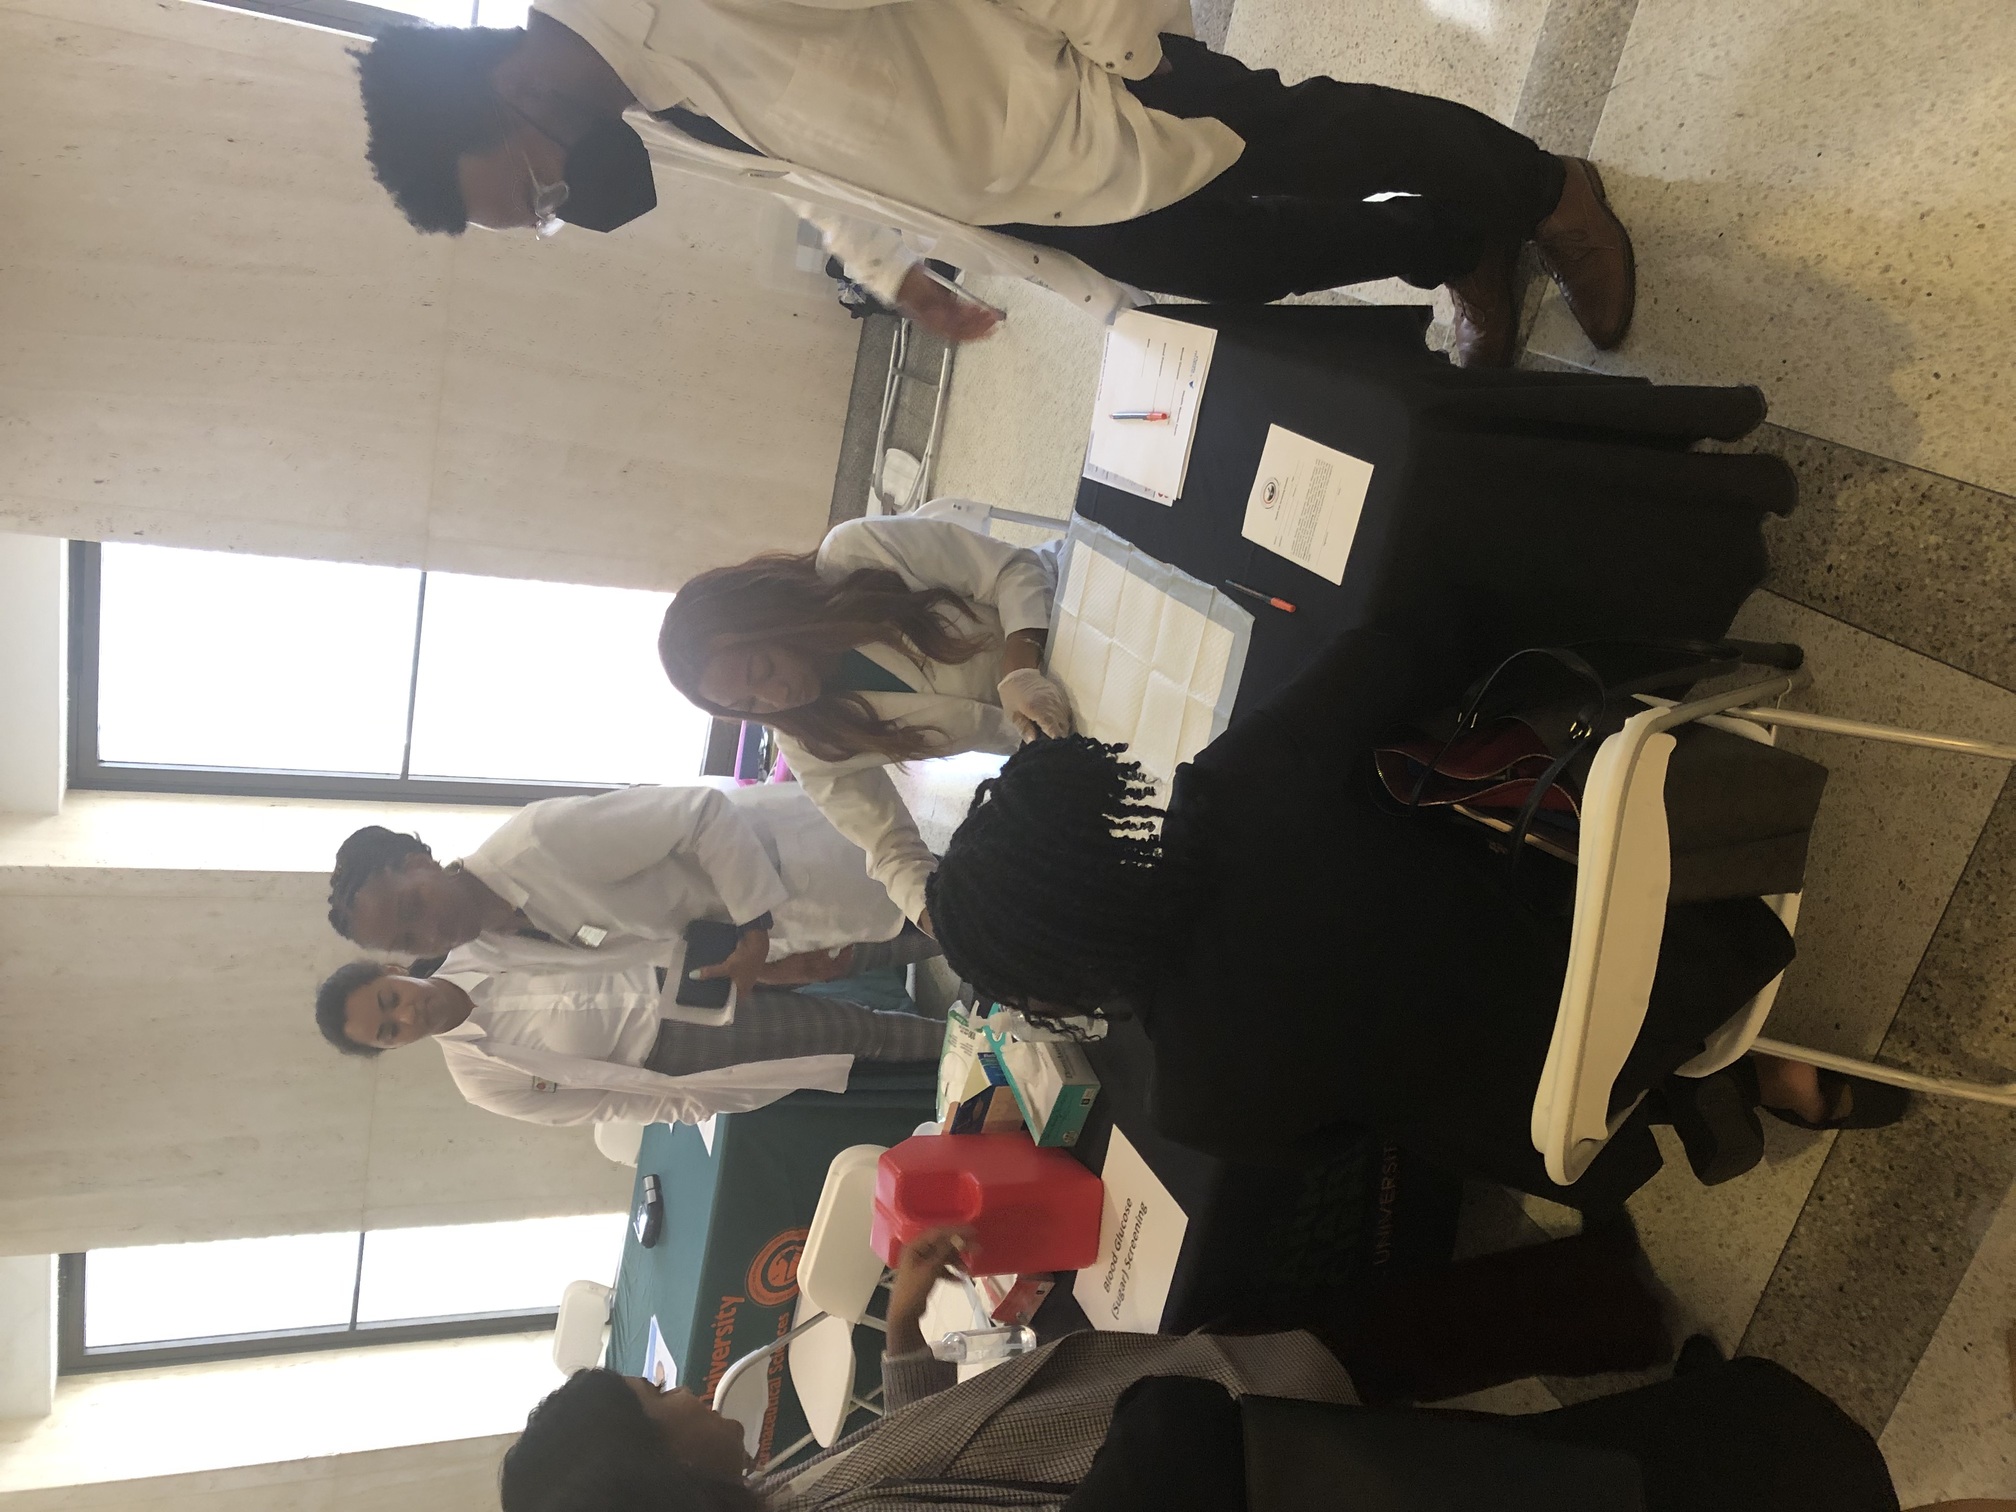 Student pharmacists participating in the health fair event image